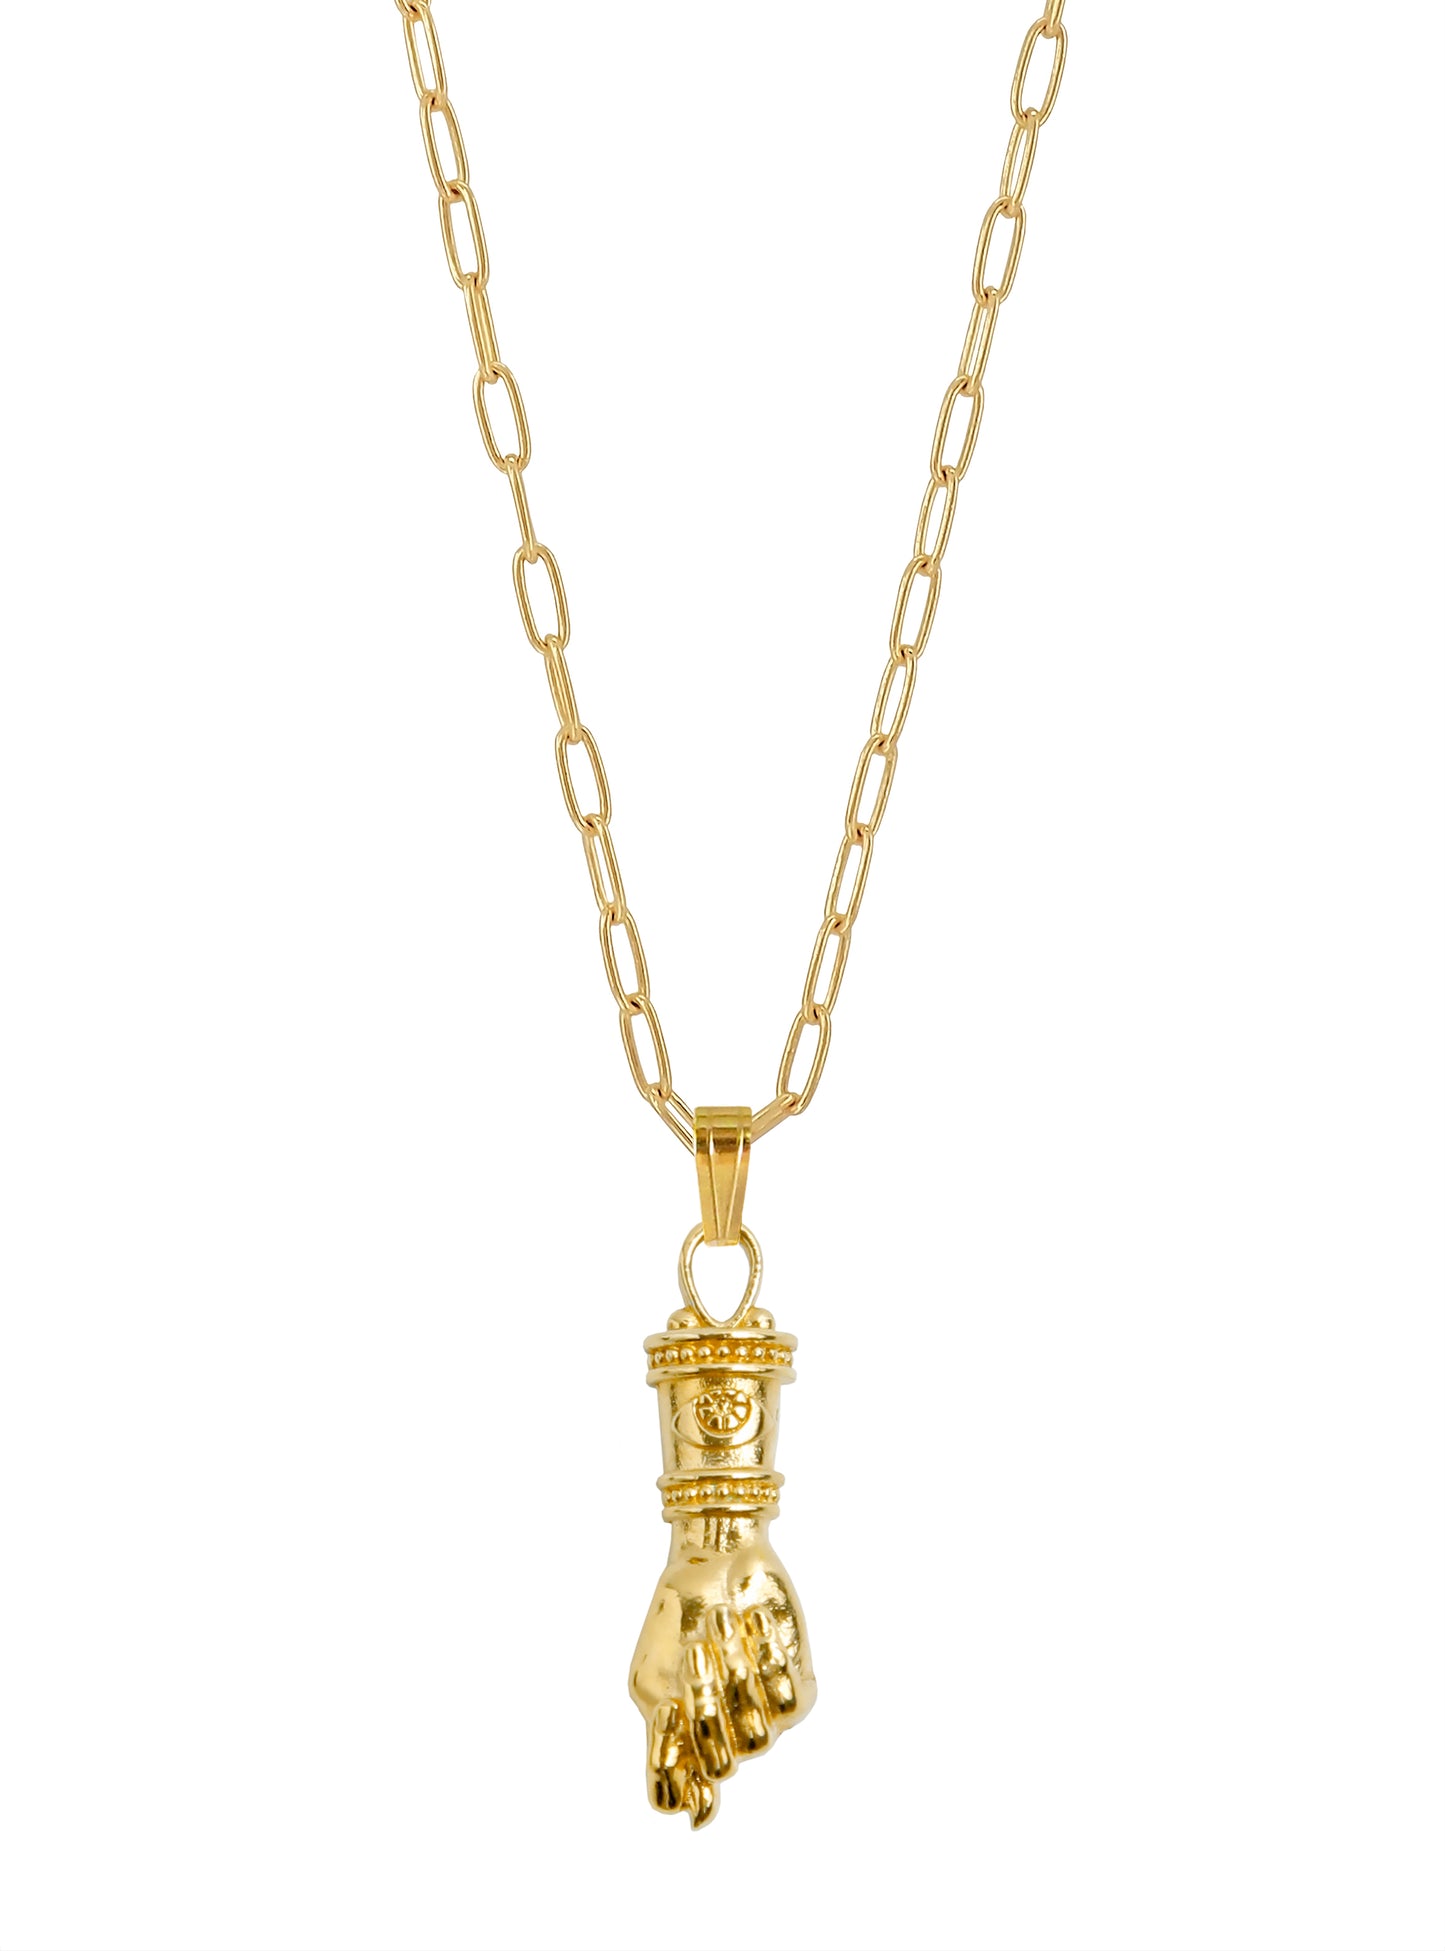 Mano Figa Talisman Necklace, Gold plated Silver, Gender Neutral